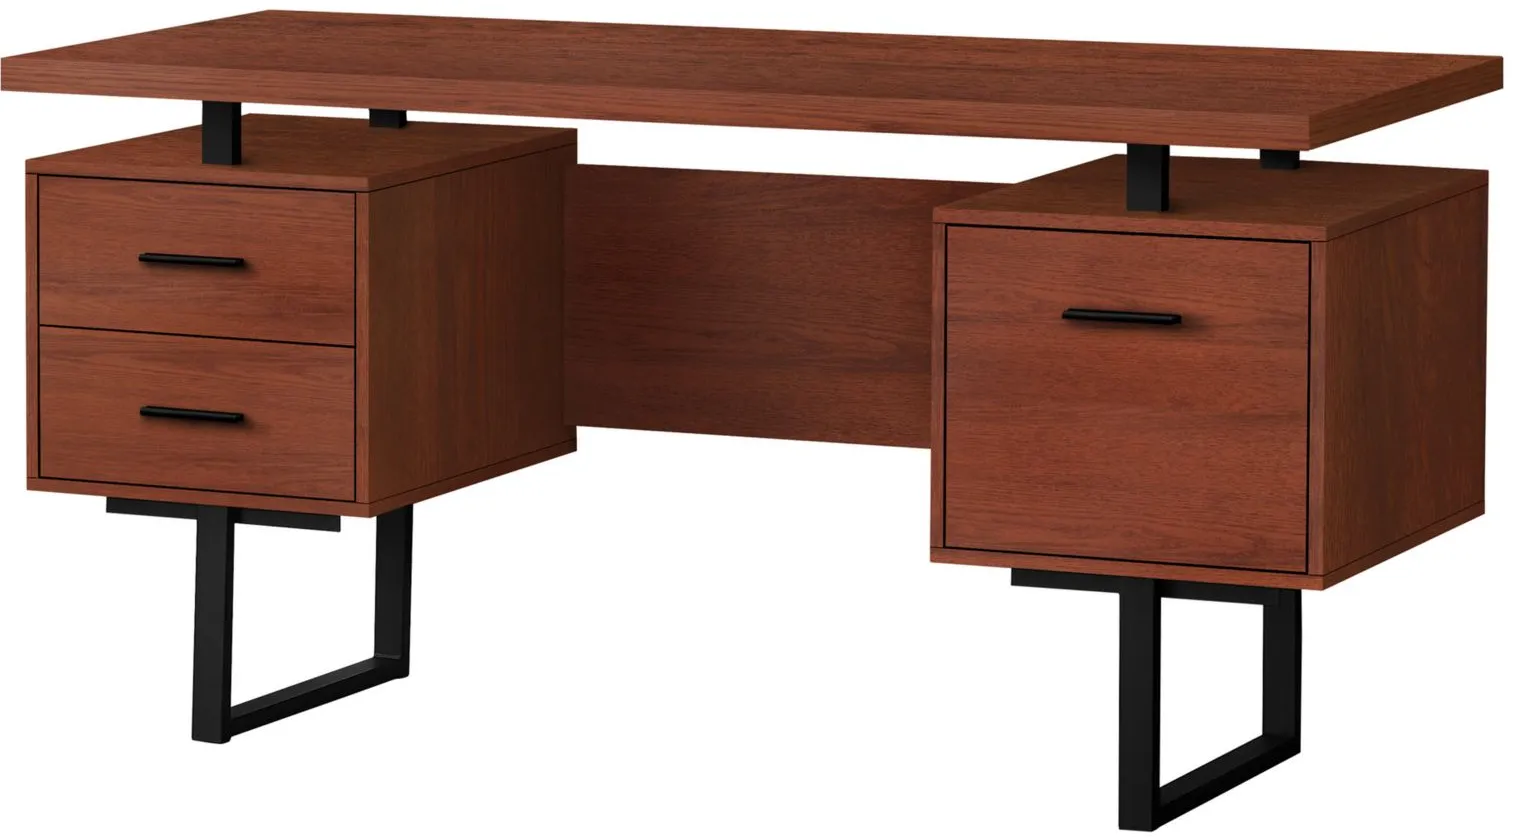 Grover Computer Desk with Floating Desktop in Cherry by Monarch Specialties